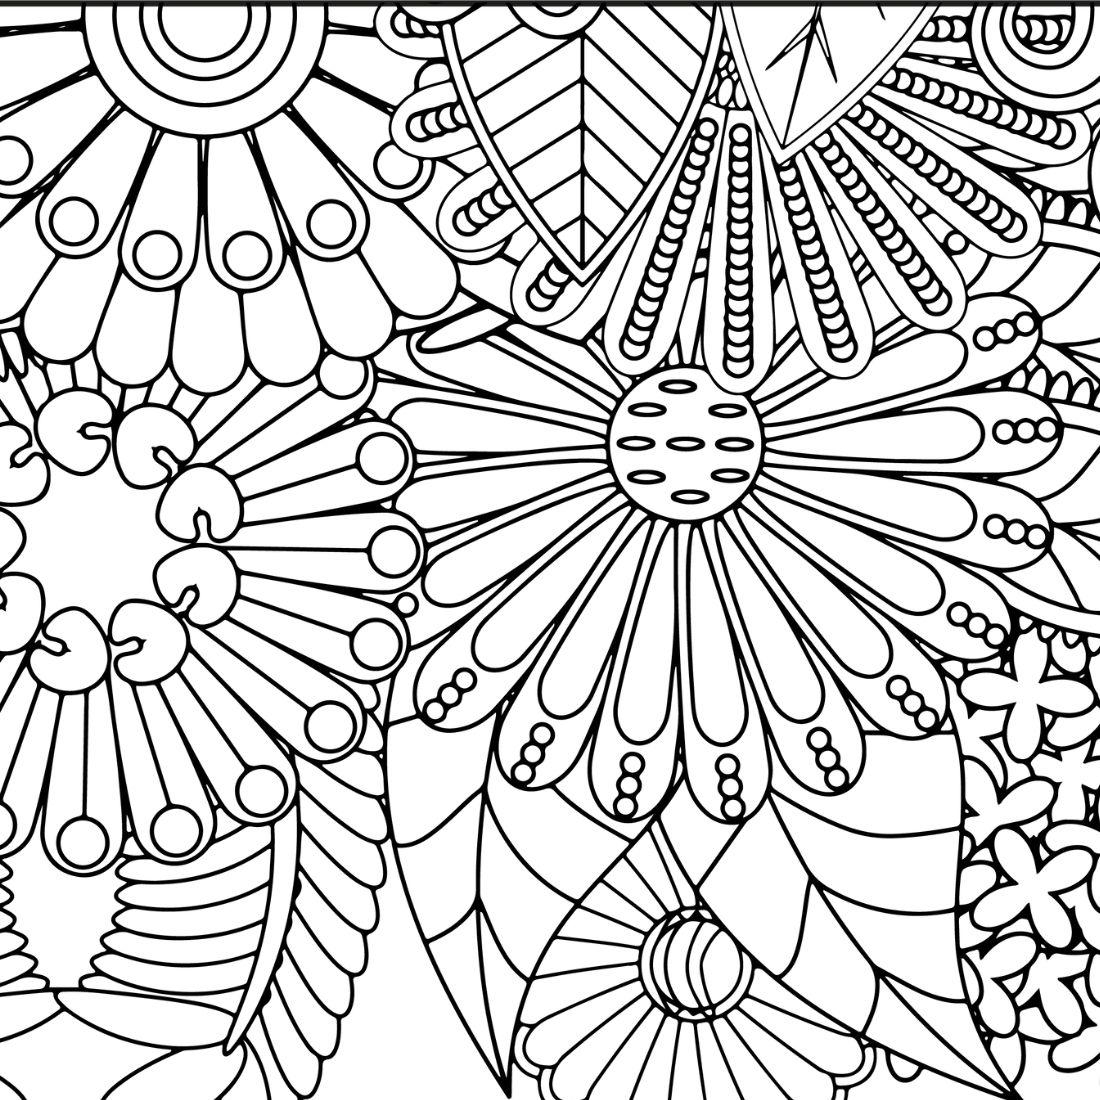 Serenity Mandalas: A Captivating Collection of 50 Digital Coloring Pages preview image.